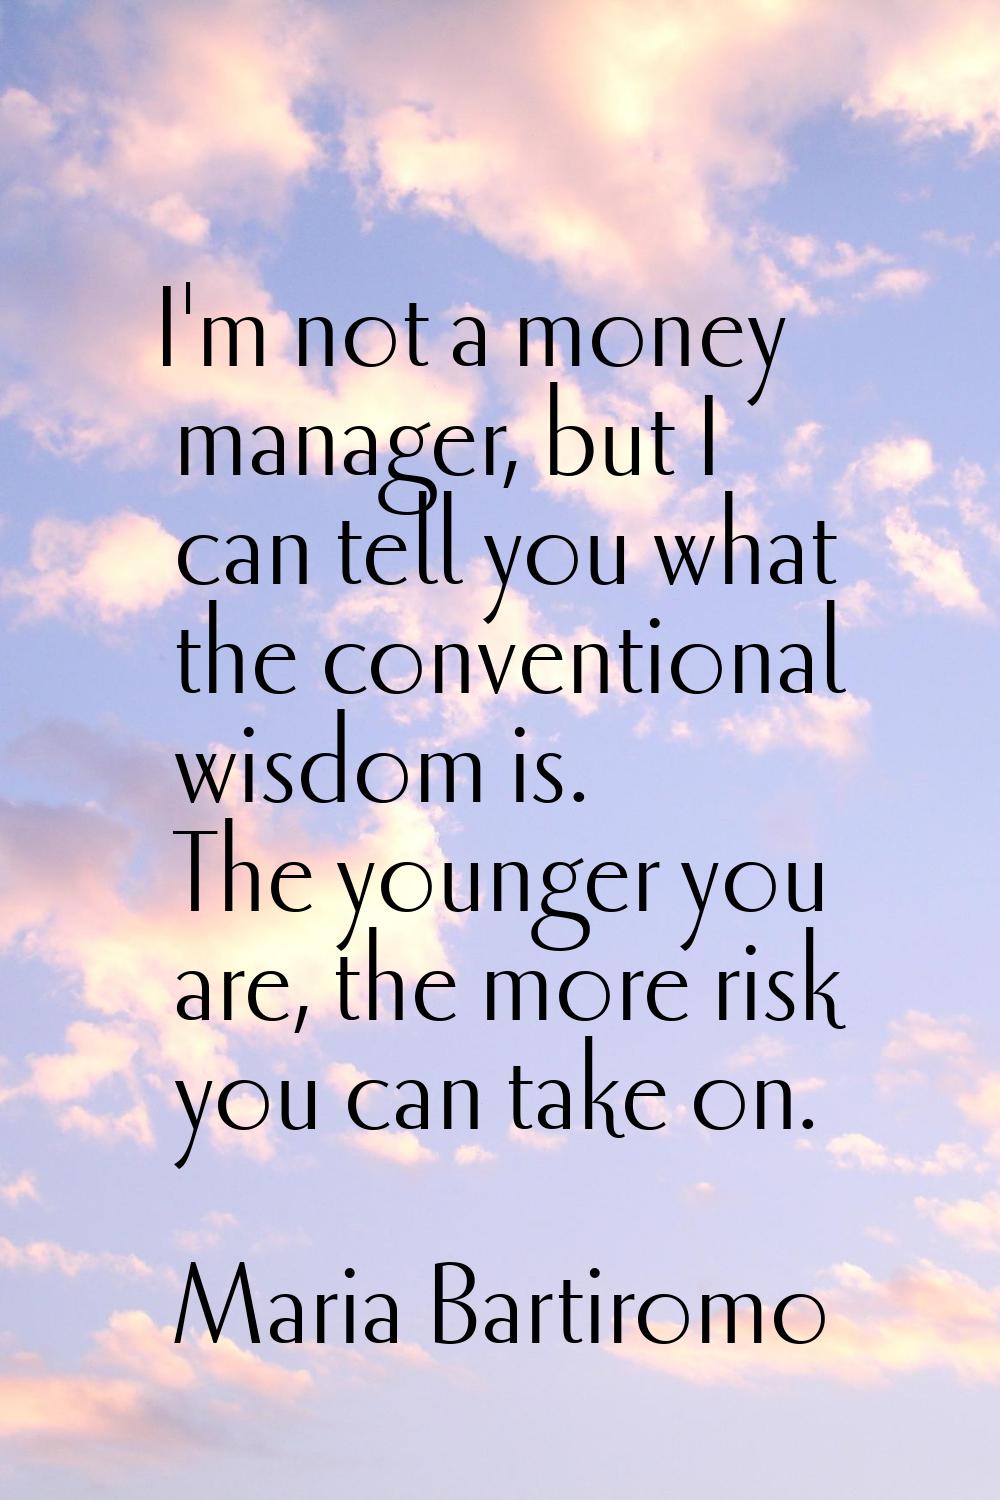 I'm not a money manager, but I can tell you what the conventional wisdom is. The younger you are, t